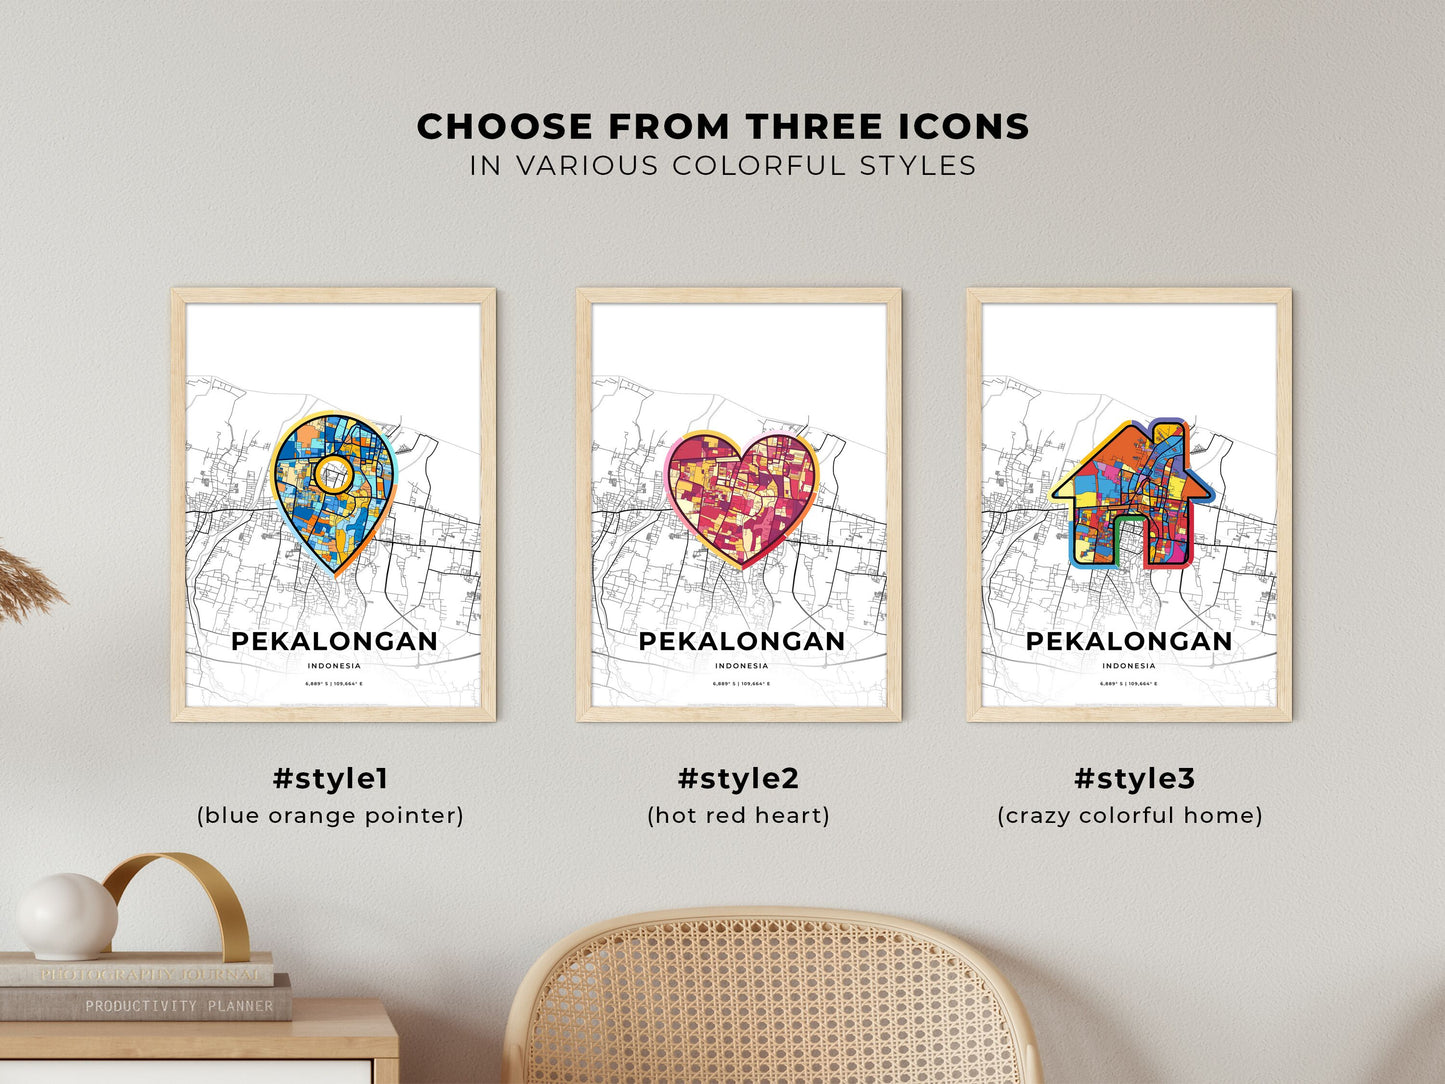 PEKALONGAN INDONESIA minimal art map with a colorful icon. Where it all began, Couple map gift.